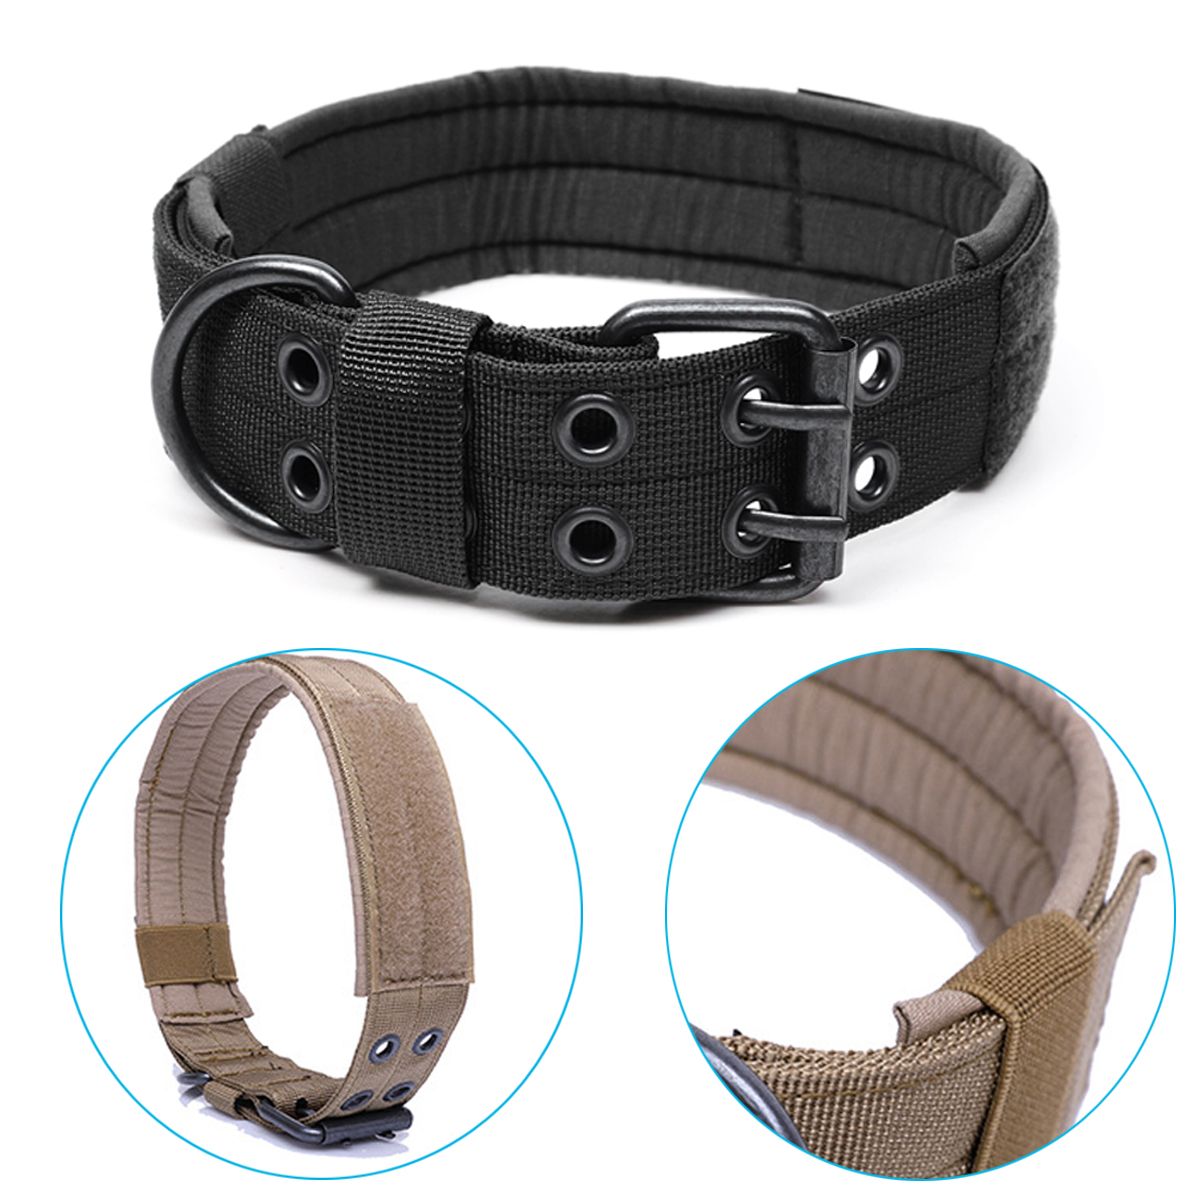 Nylon-Tactical-Dog-Collar-Military-Adjustable-Training-Dog-Collar-with-Metal-D-Ring-Buckle-L-Size-1310253